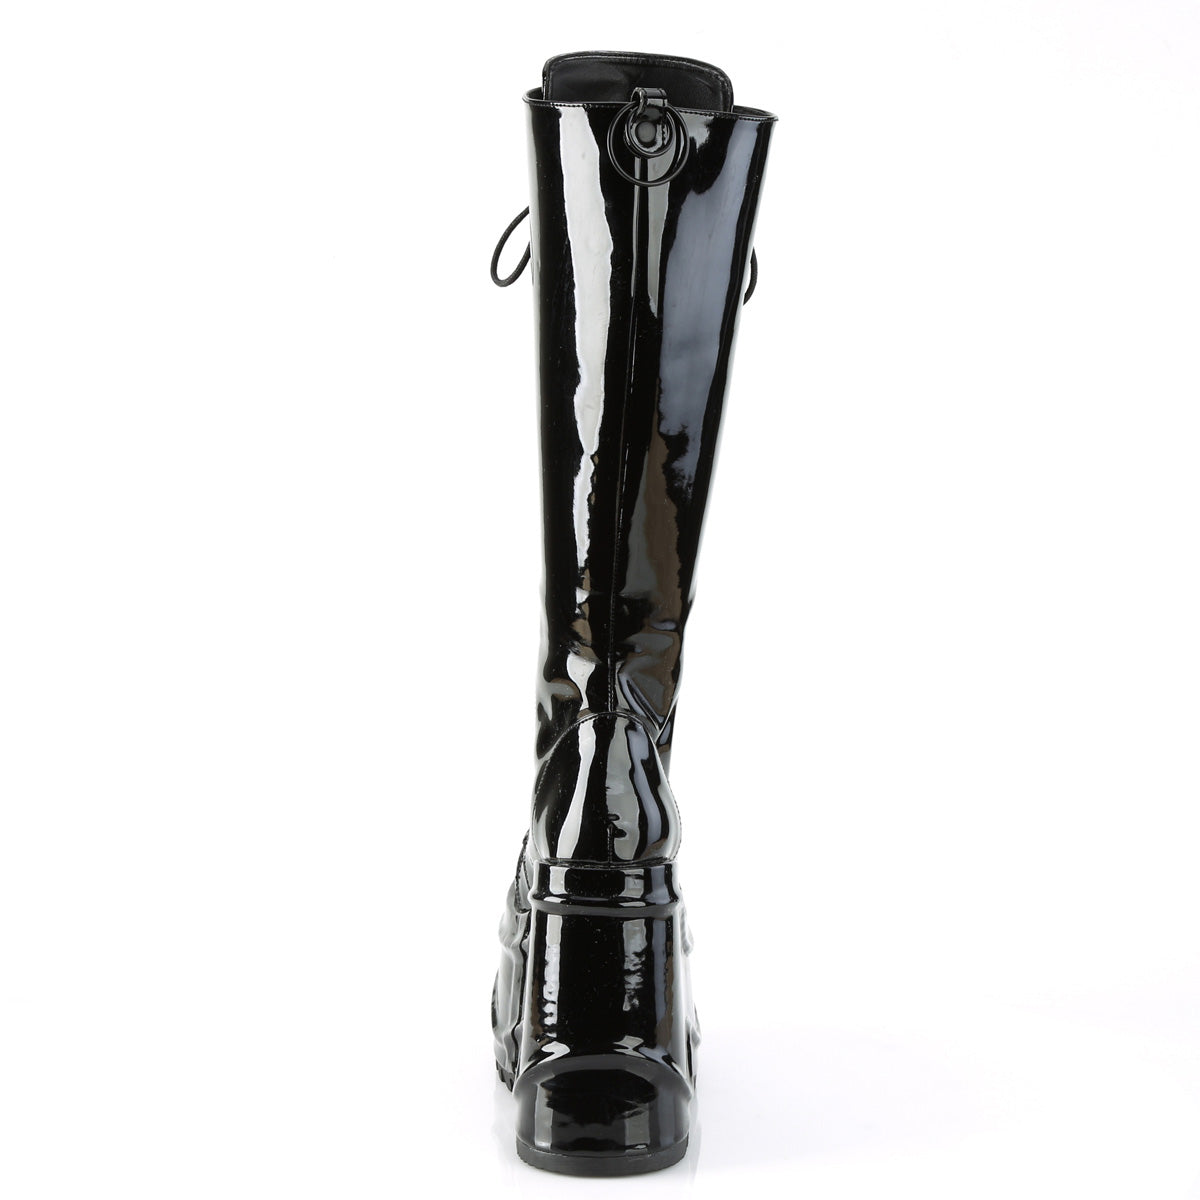 DemoniaCult Womens Boots WAVE-200 Blk Patent